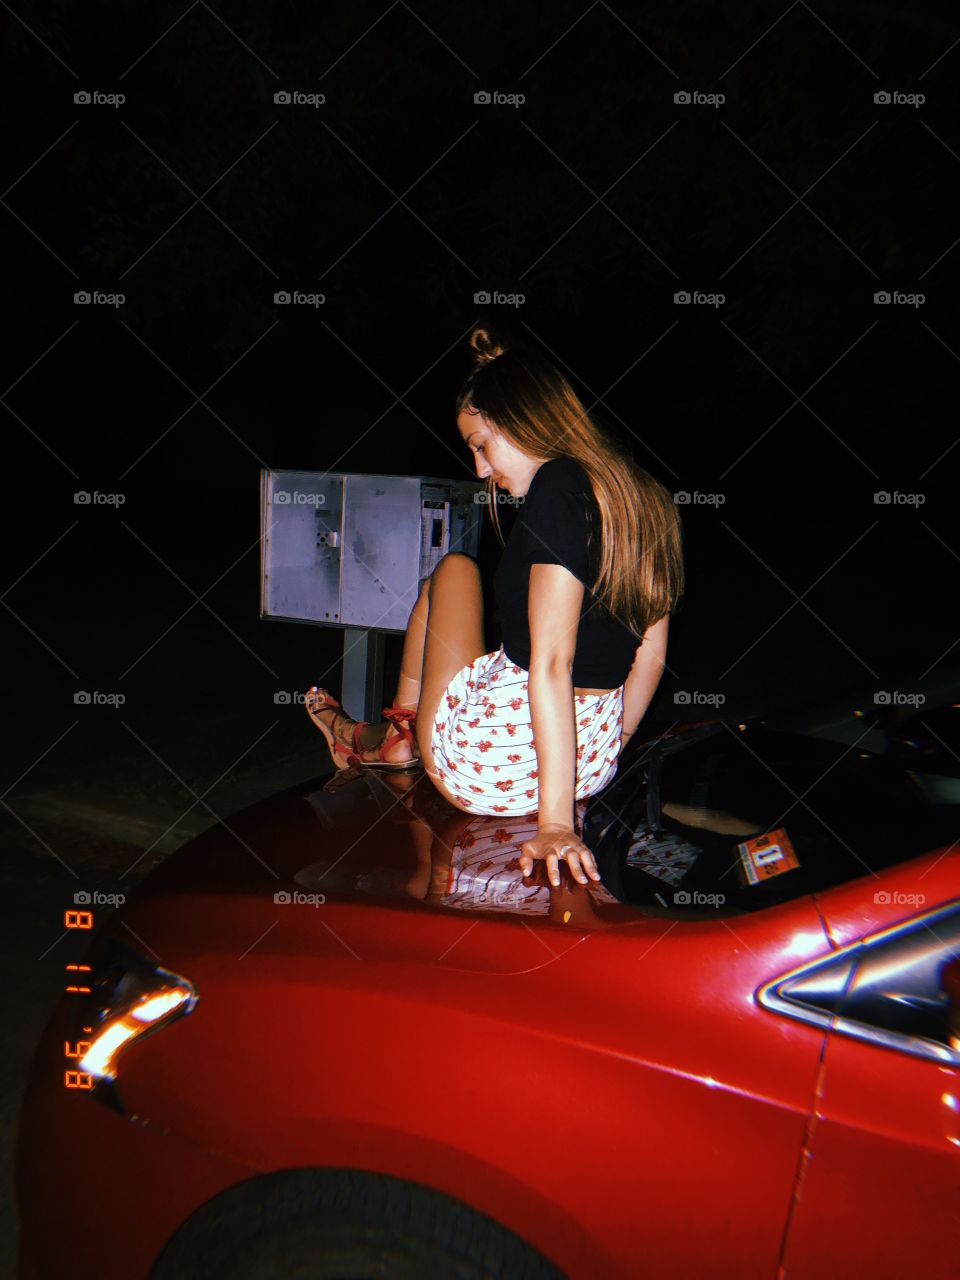 Female sitting on hood of red car at night